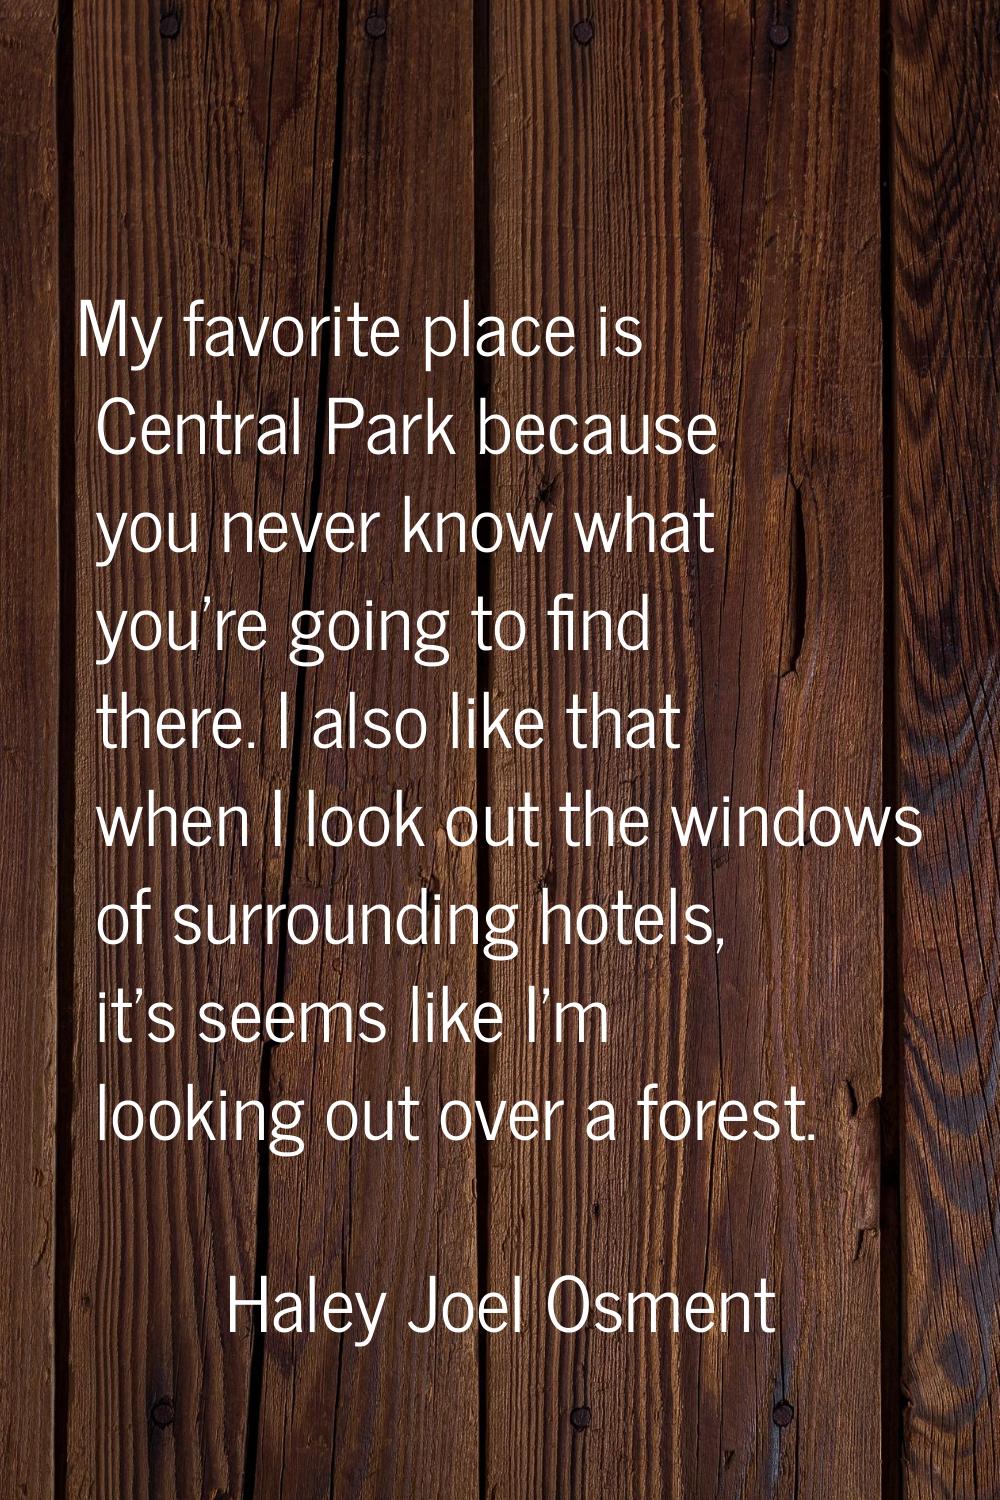 My favorite place is Central Park because you never know what you're going to find there. I also li